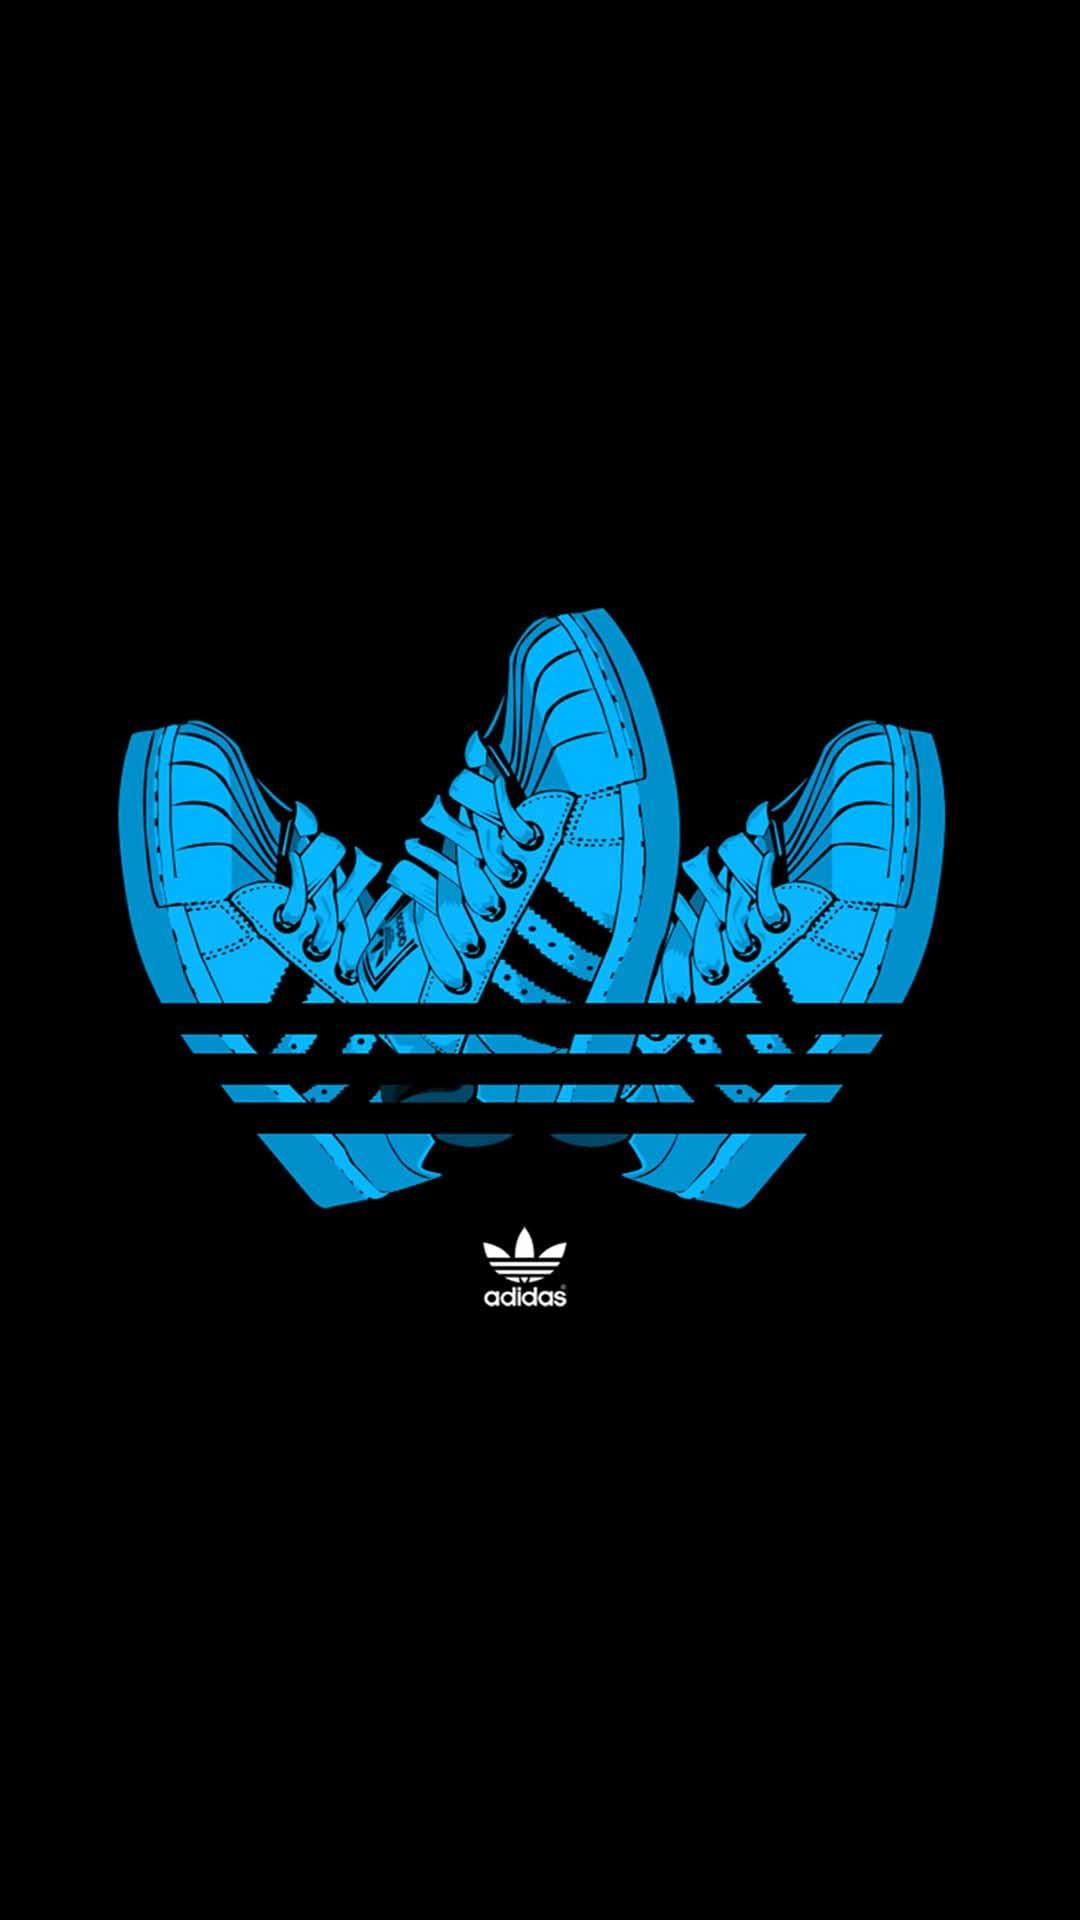 Adidas Wallpaper for iPhone X, 6